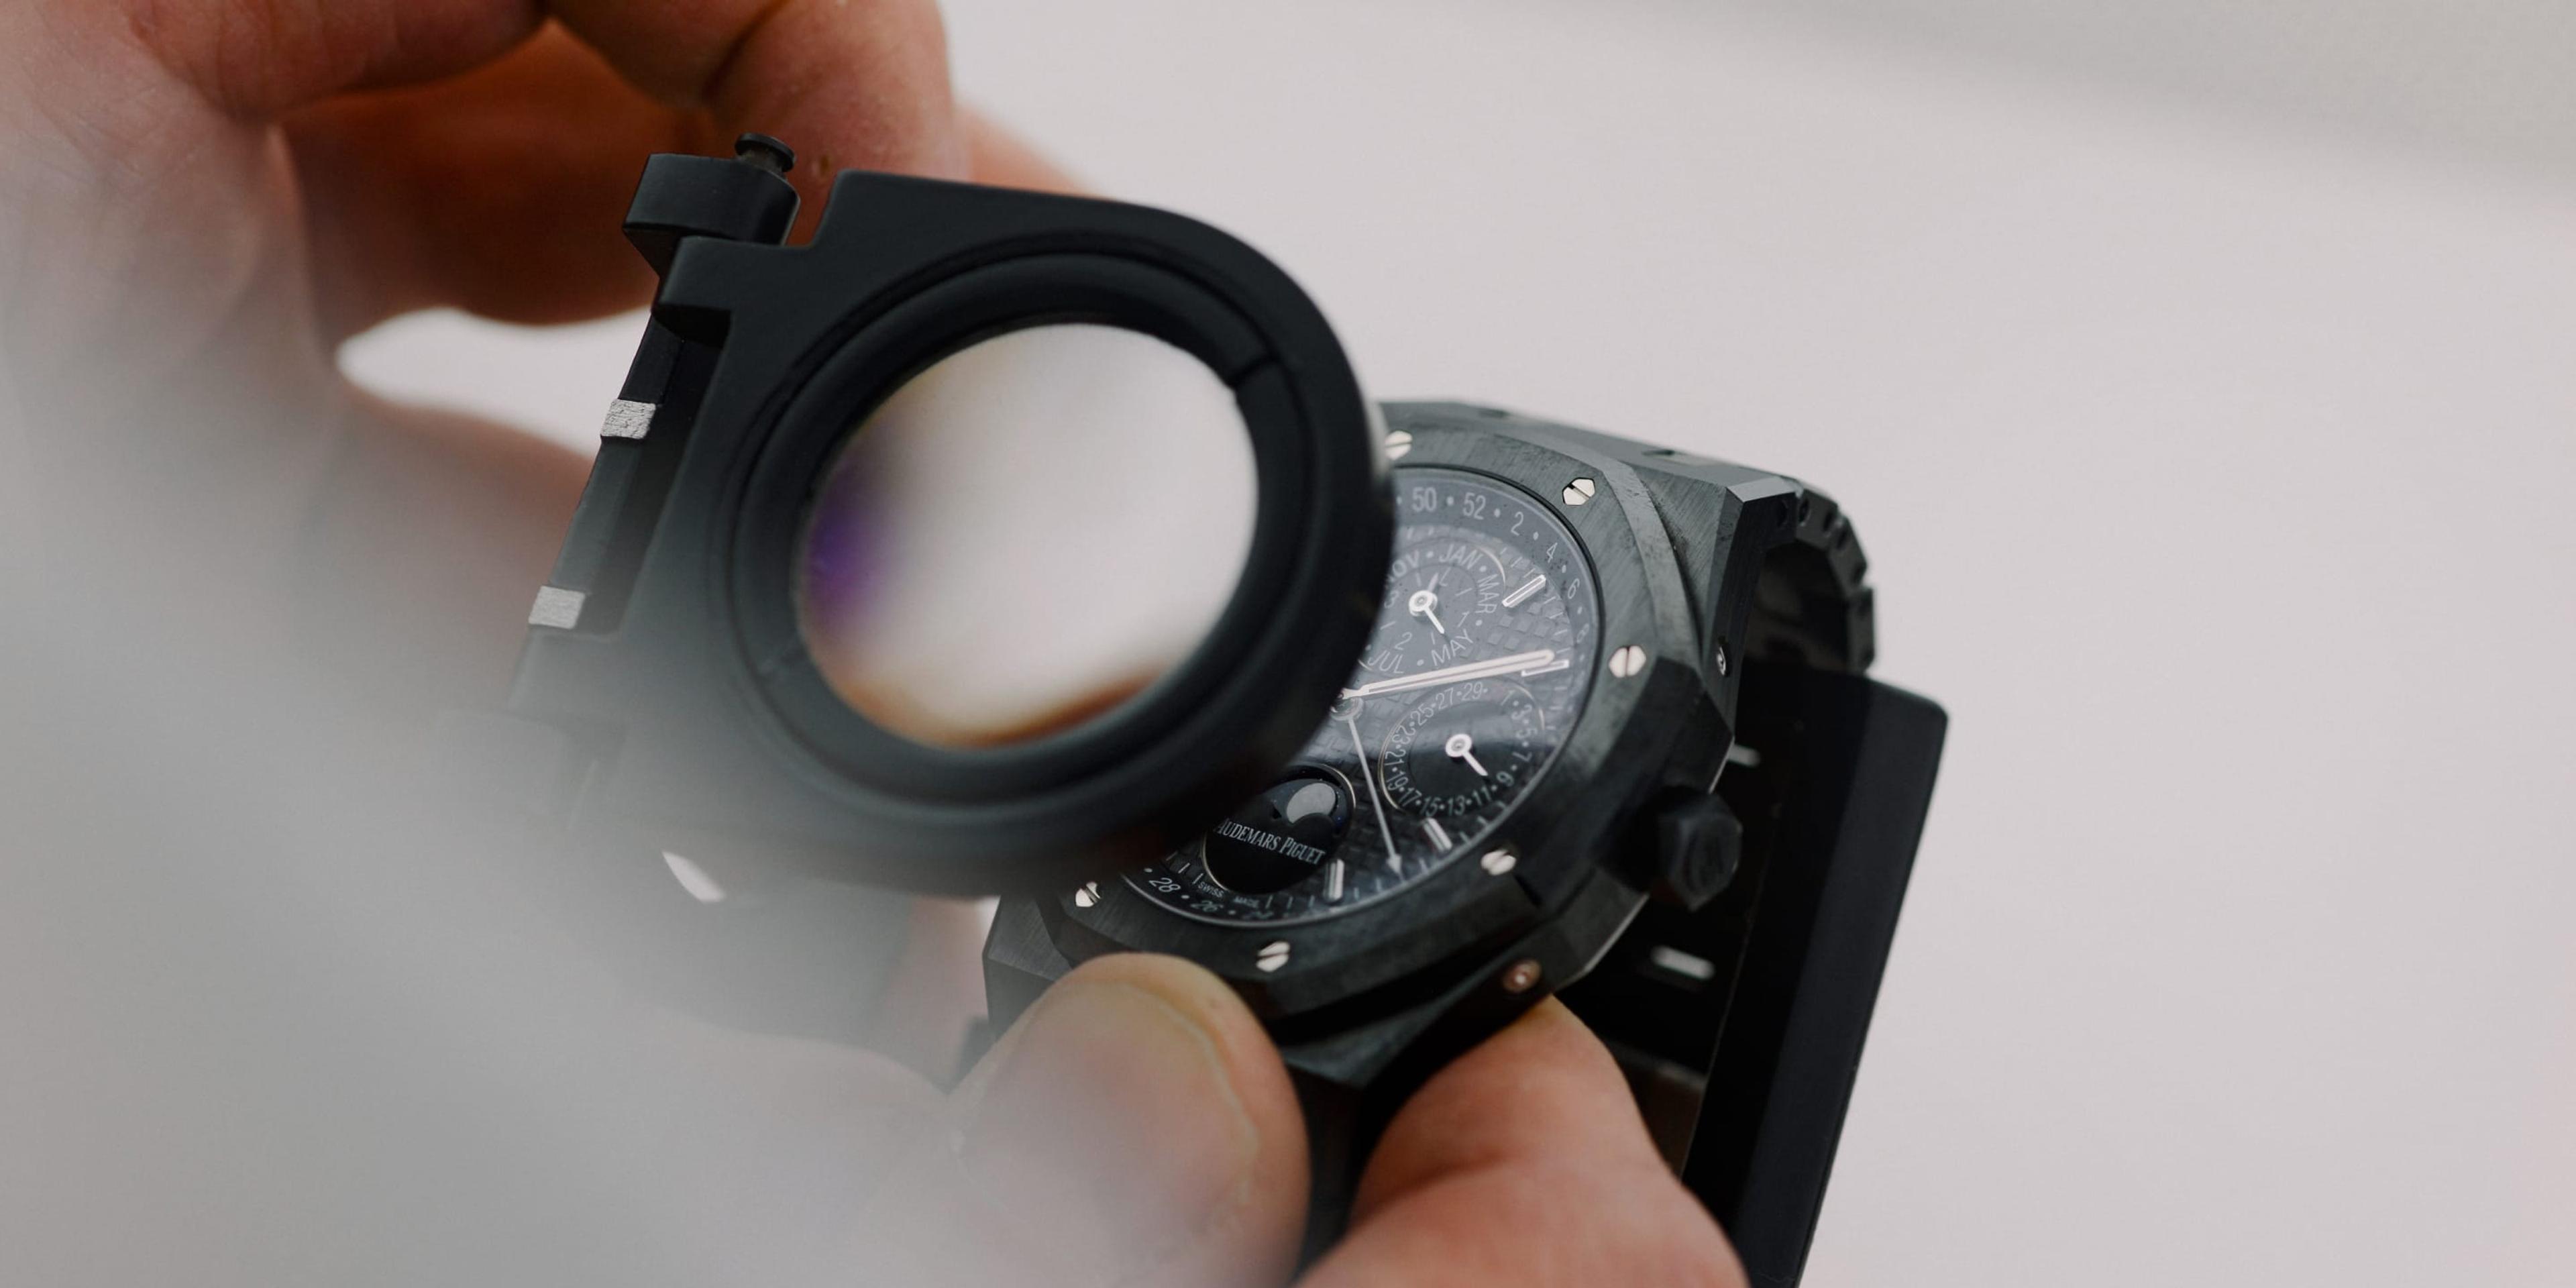 Someone views a watch face using a loupe